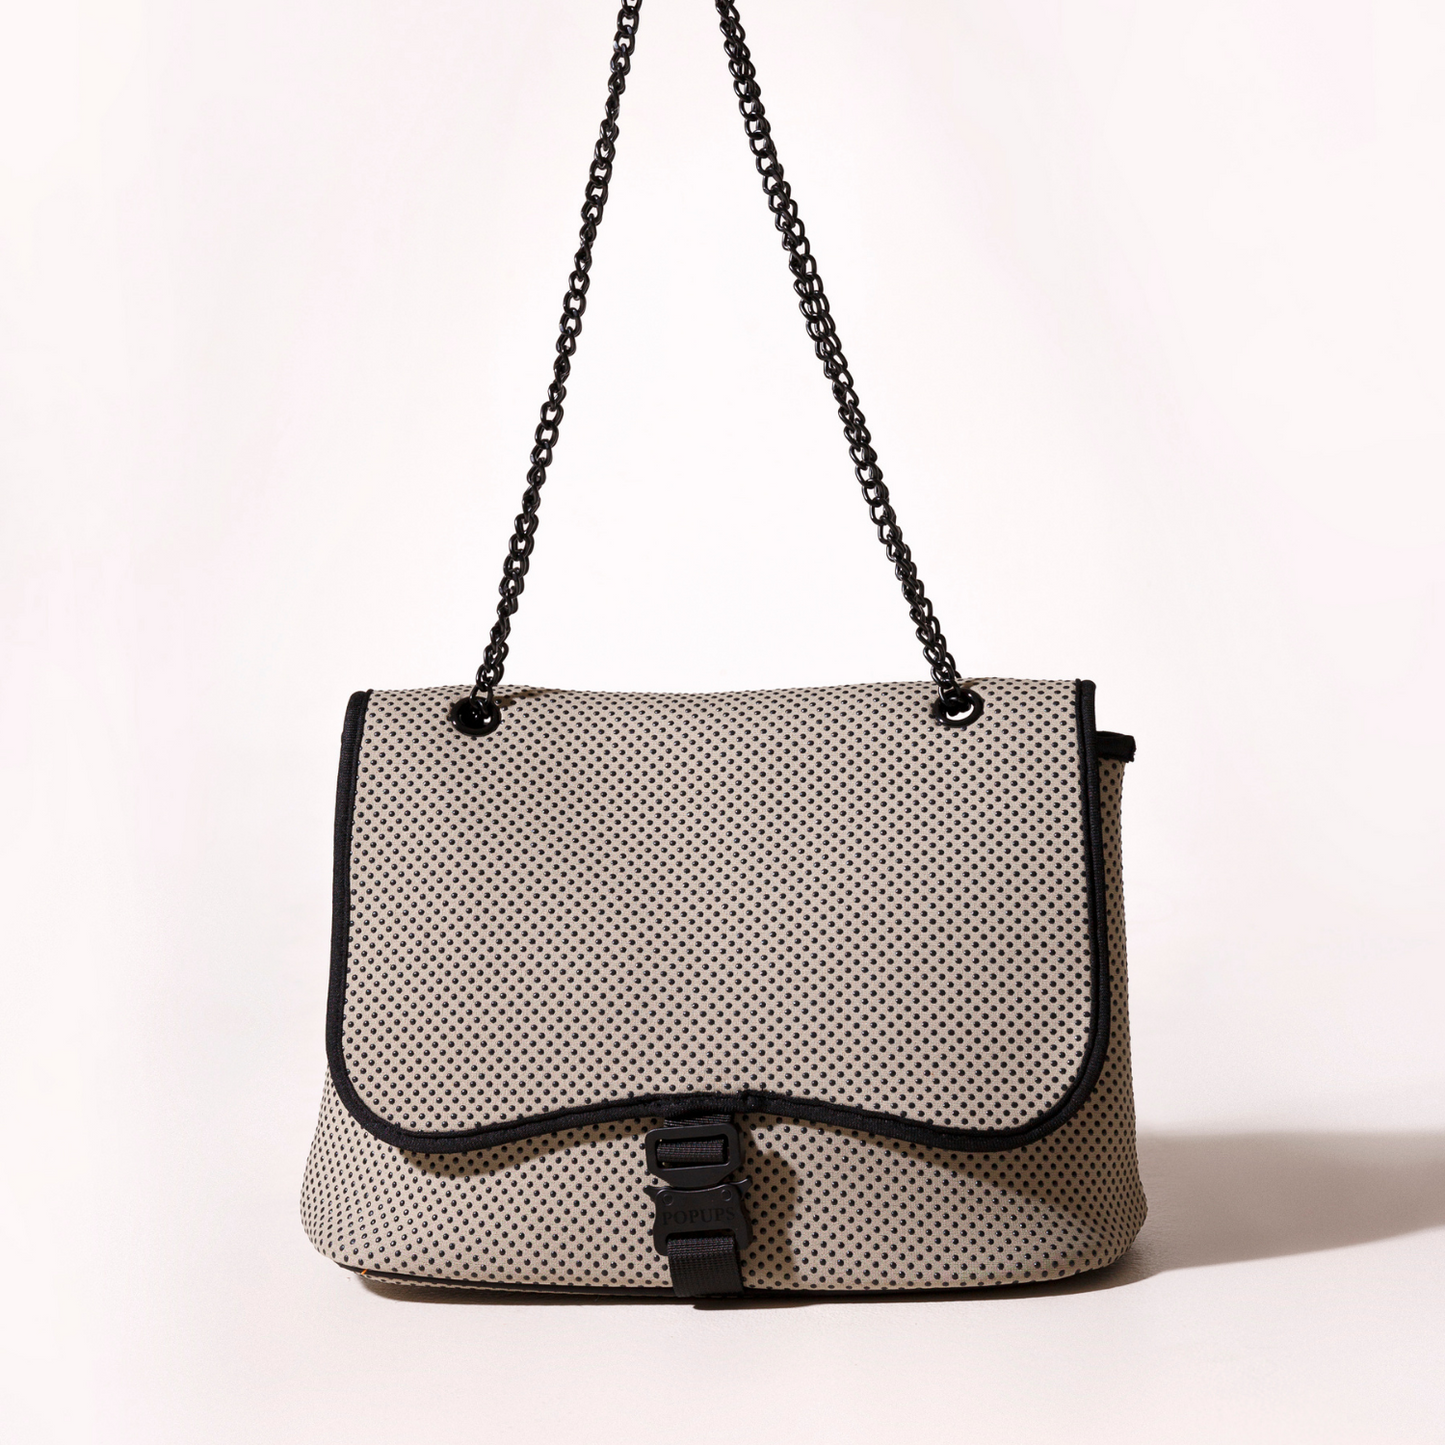 CAMERA BAG + FLAP CROSSBODY + EVERYDAY TOTE - TAUPE